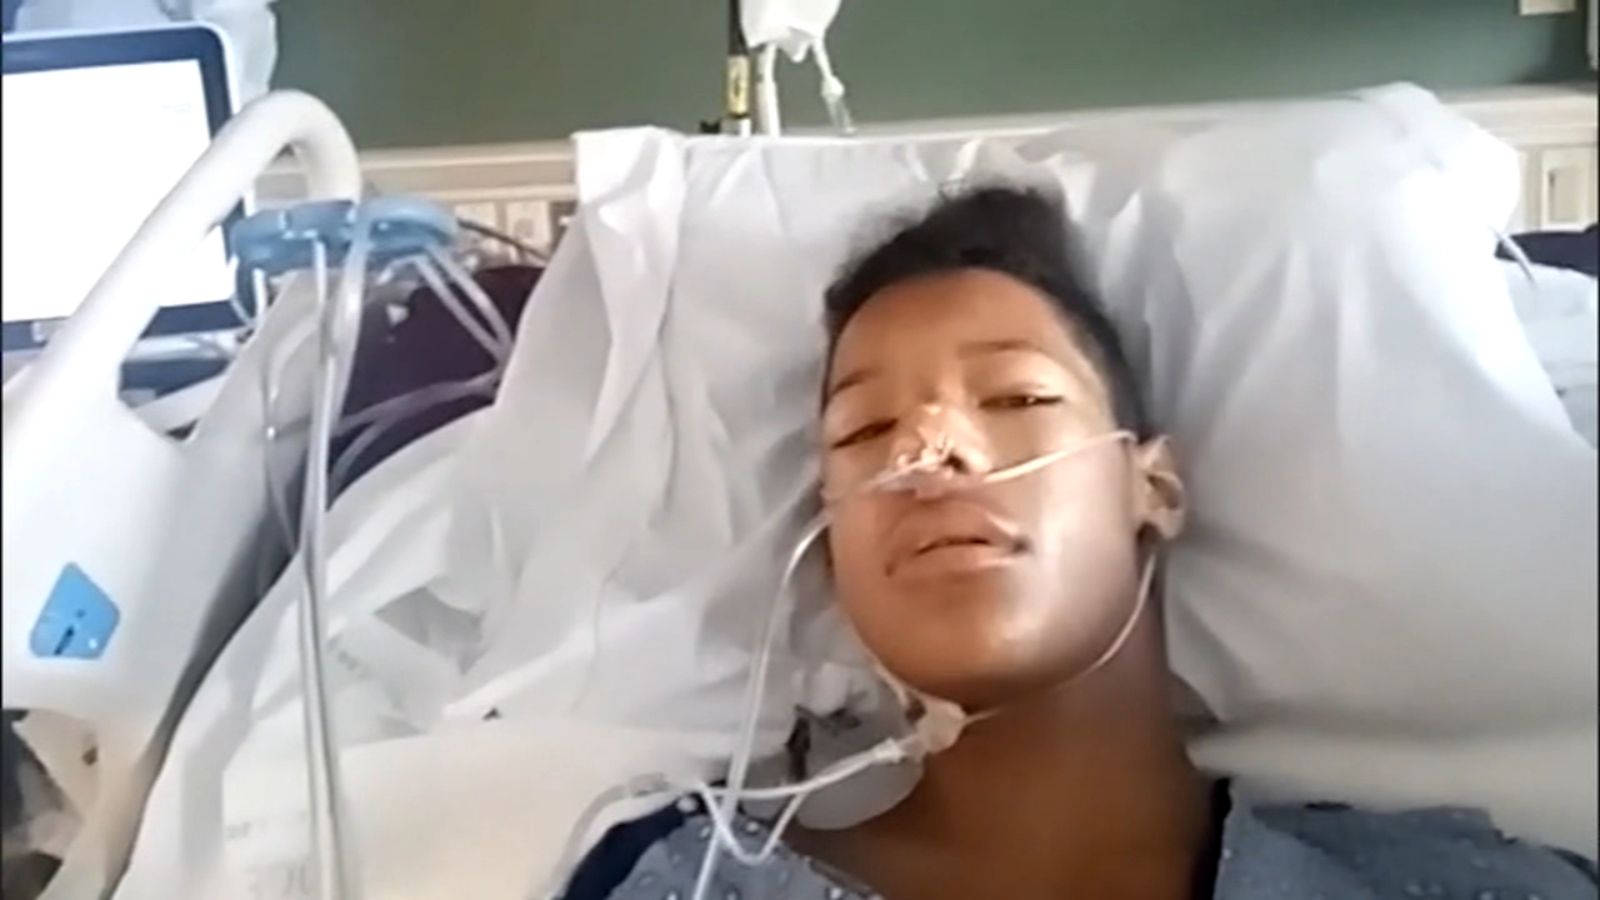 13-year old Miracle Juvy in critical condition after being pushed off a building